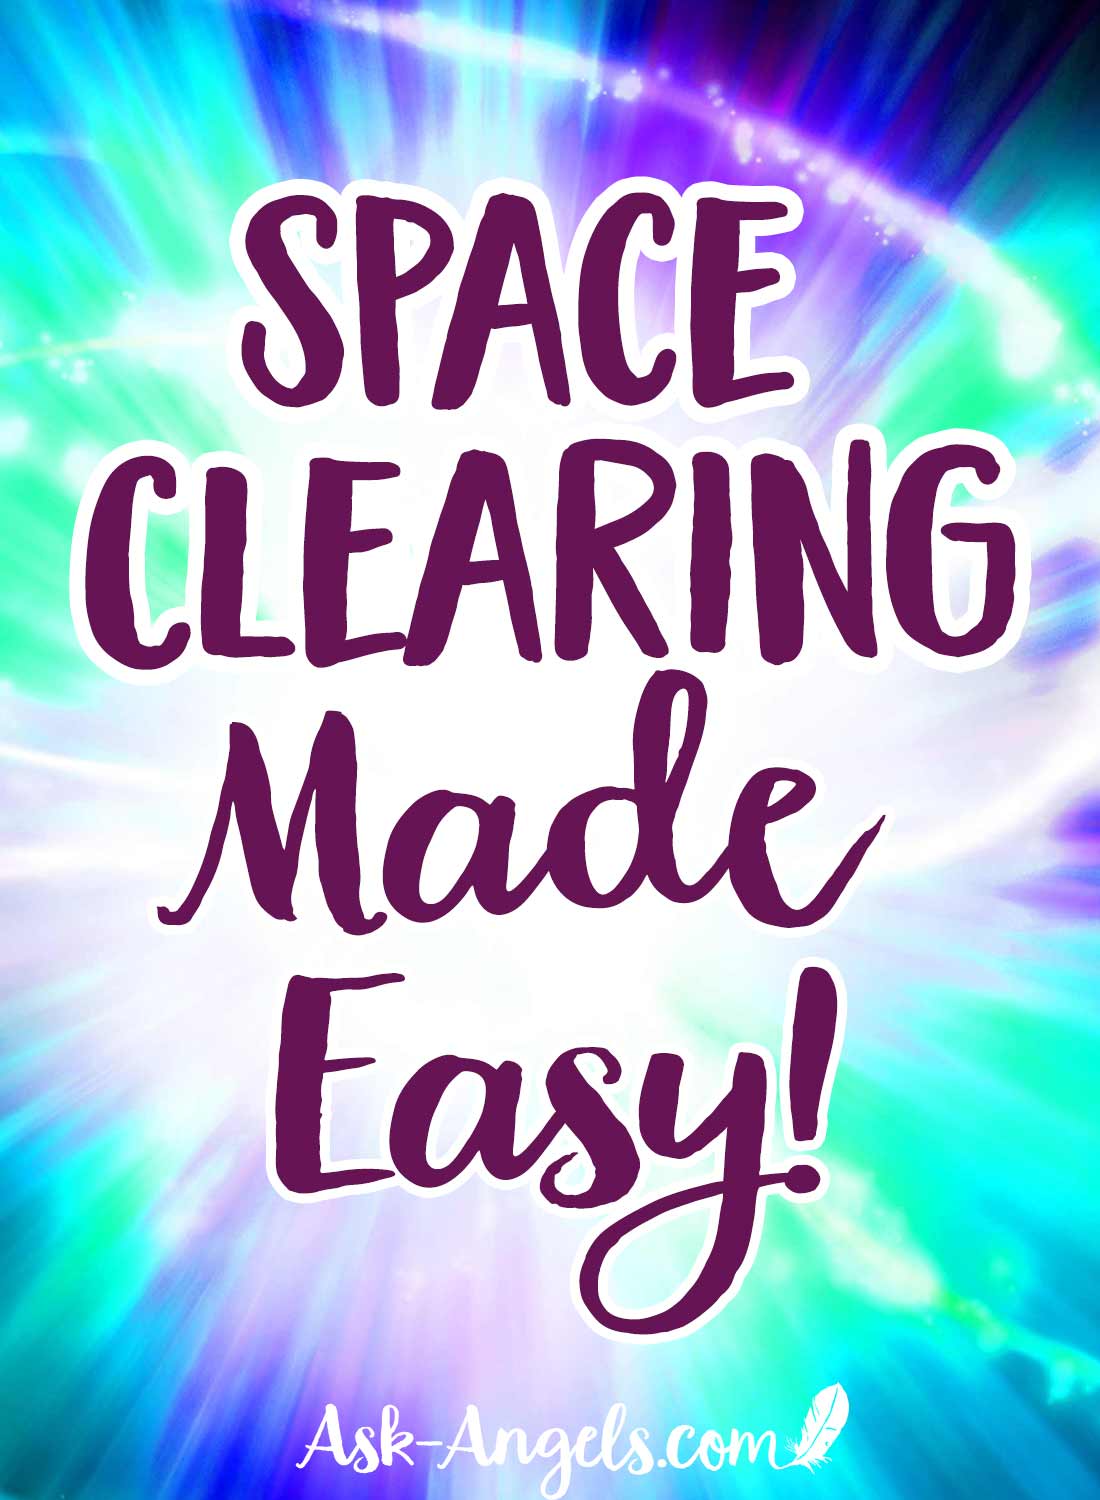 Space Clearing Made Easy!